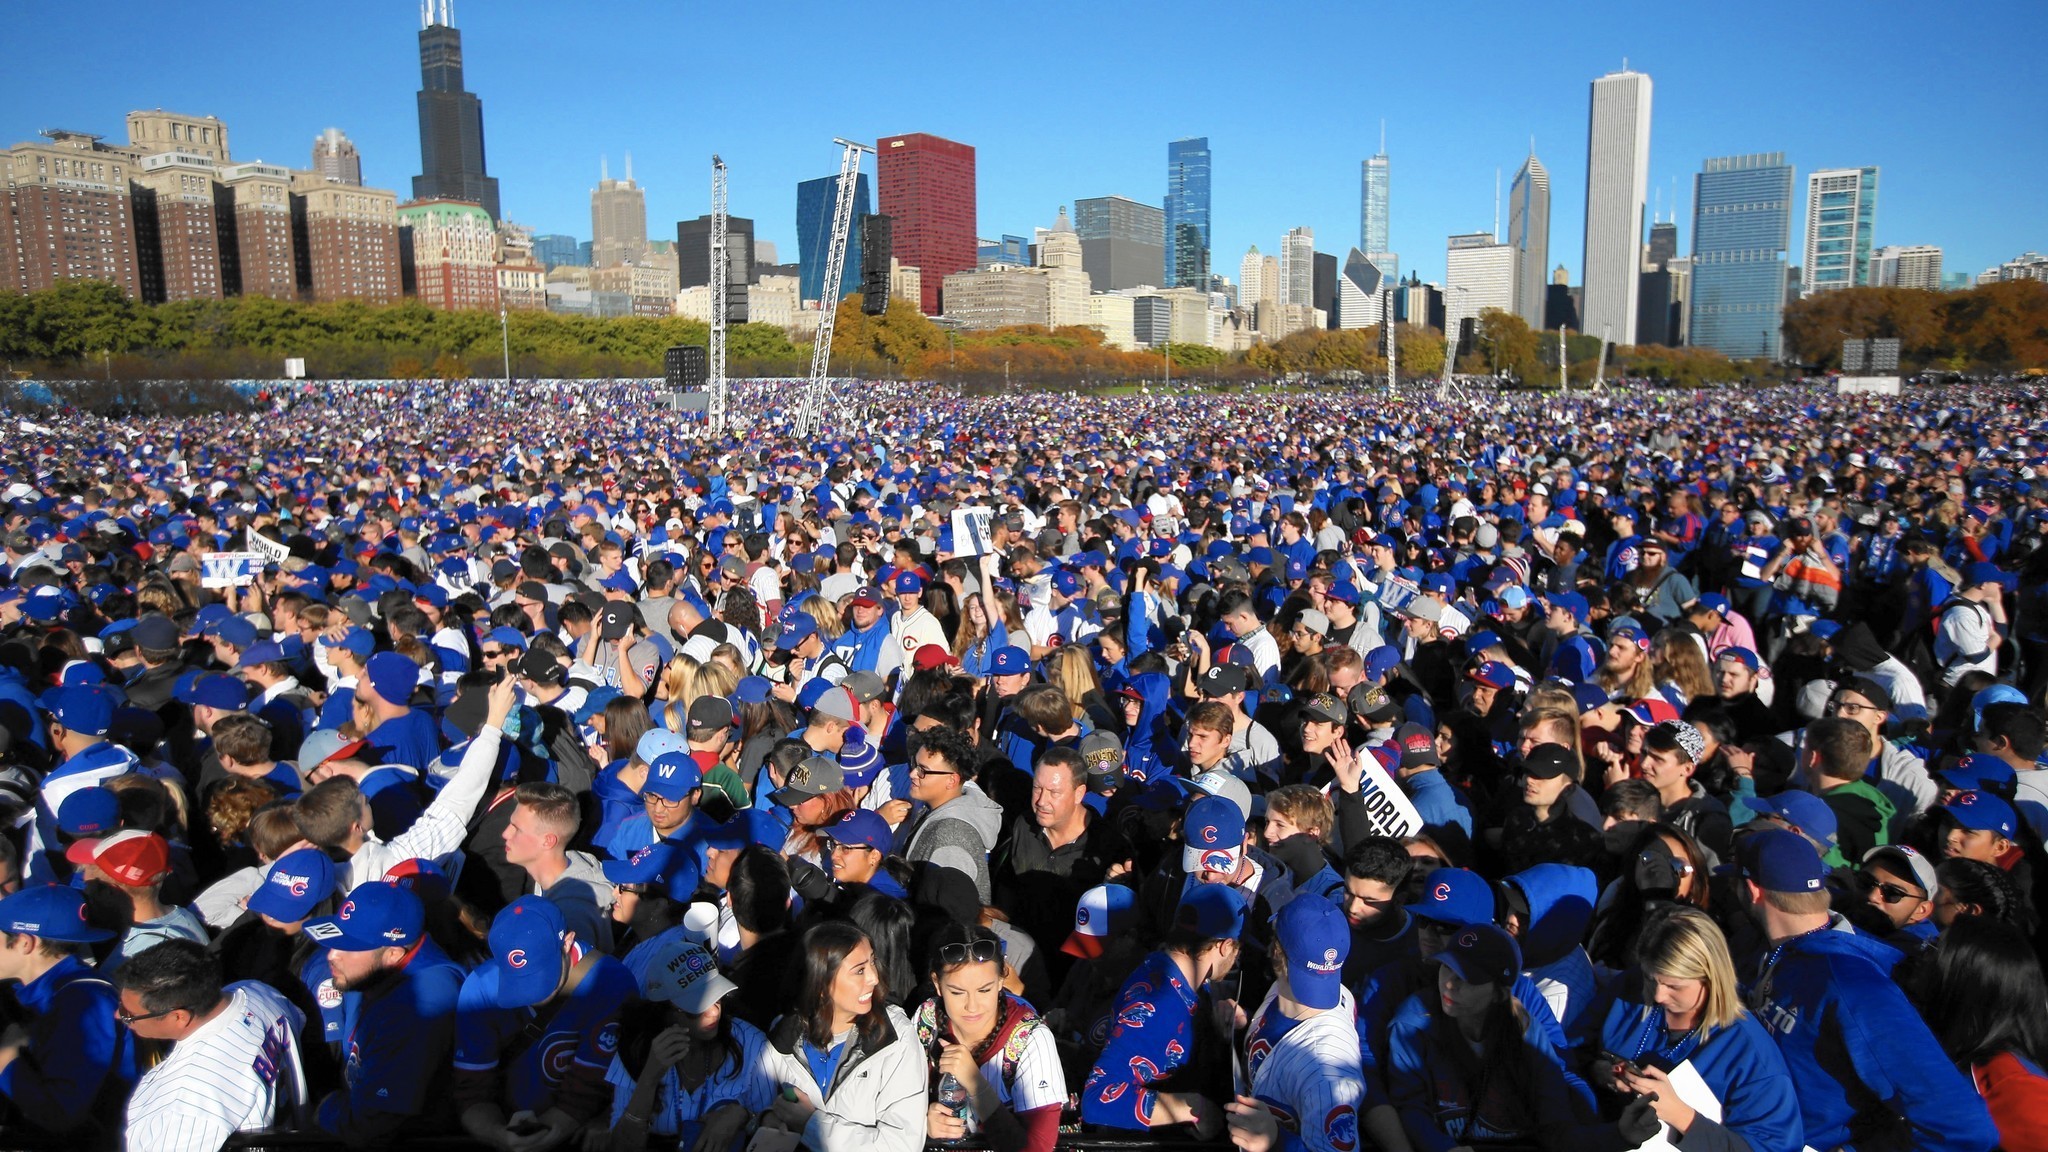 2048x1152 5 million at the Cubs rally and parade? I don't think so - Chicago Tribune